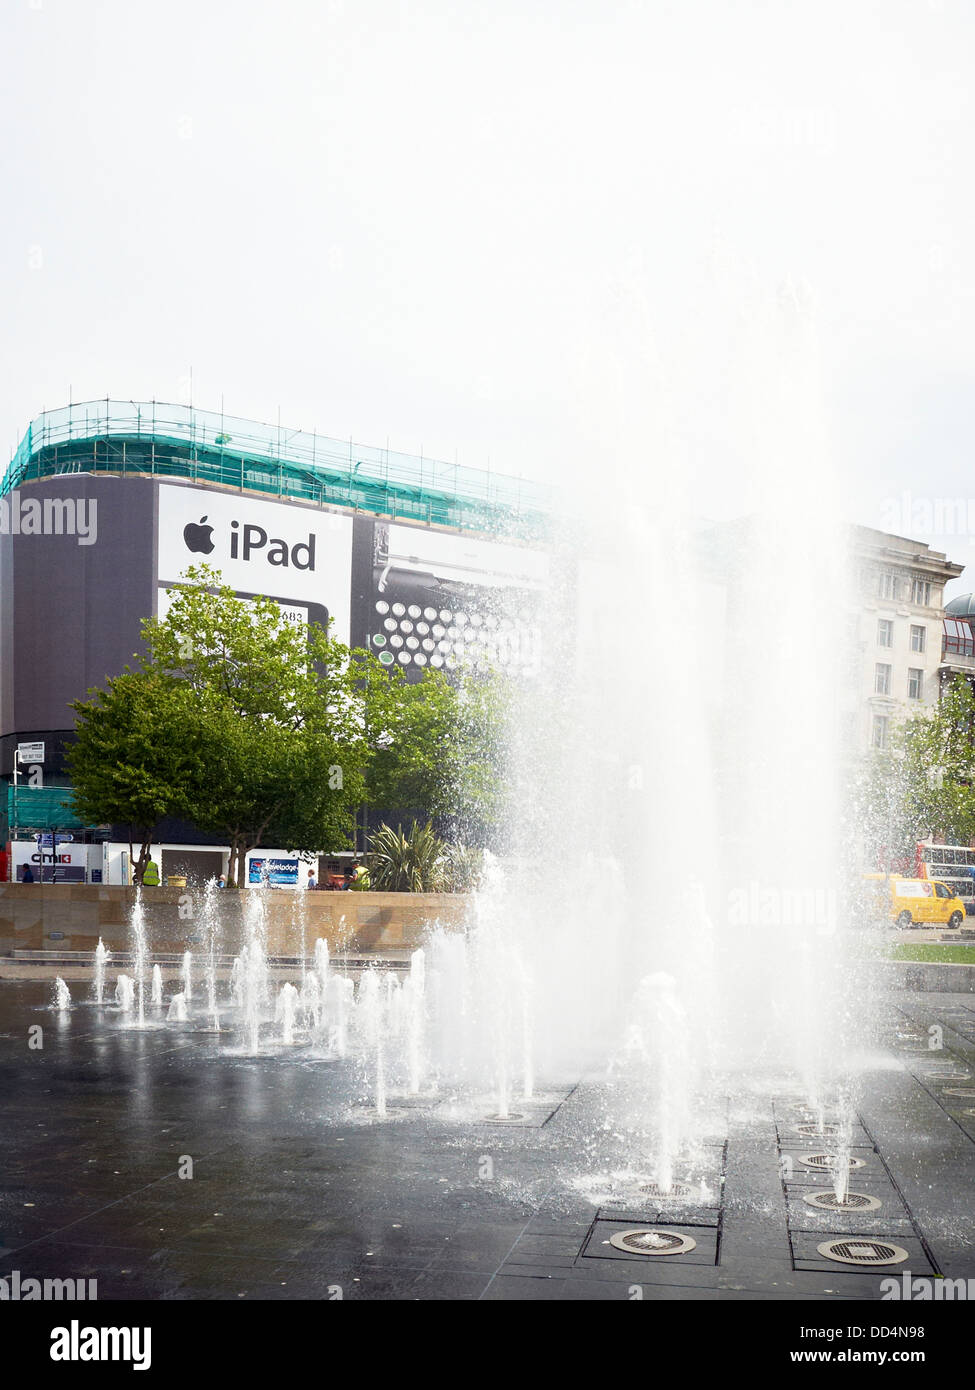 Piccadilly Gardens fountain with iPad commercial in Manchester UK Stock Photo